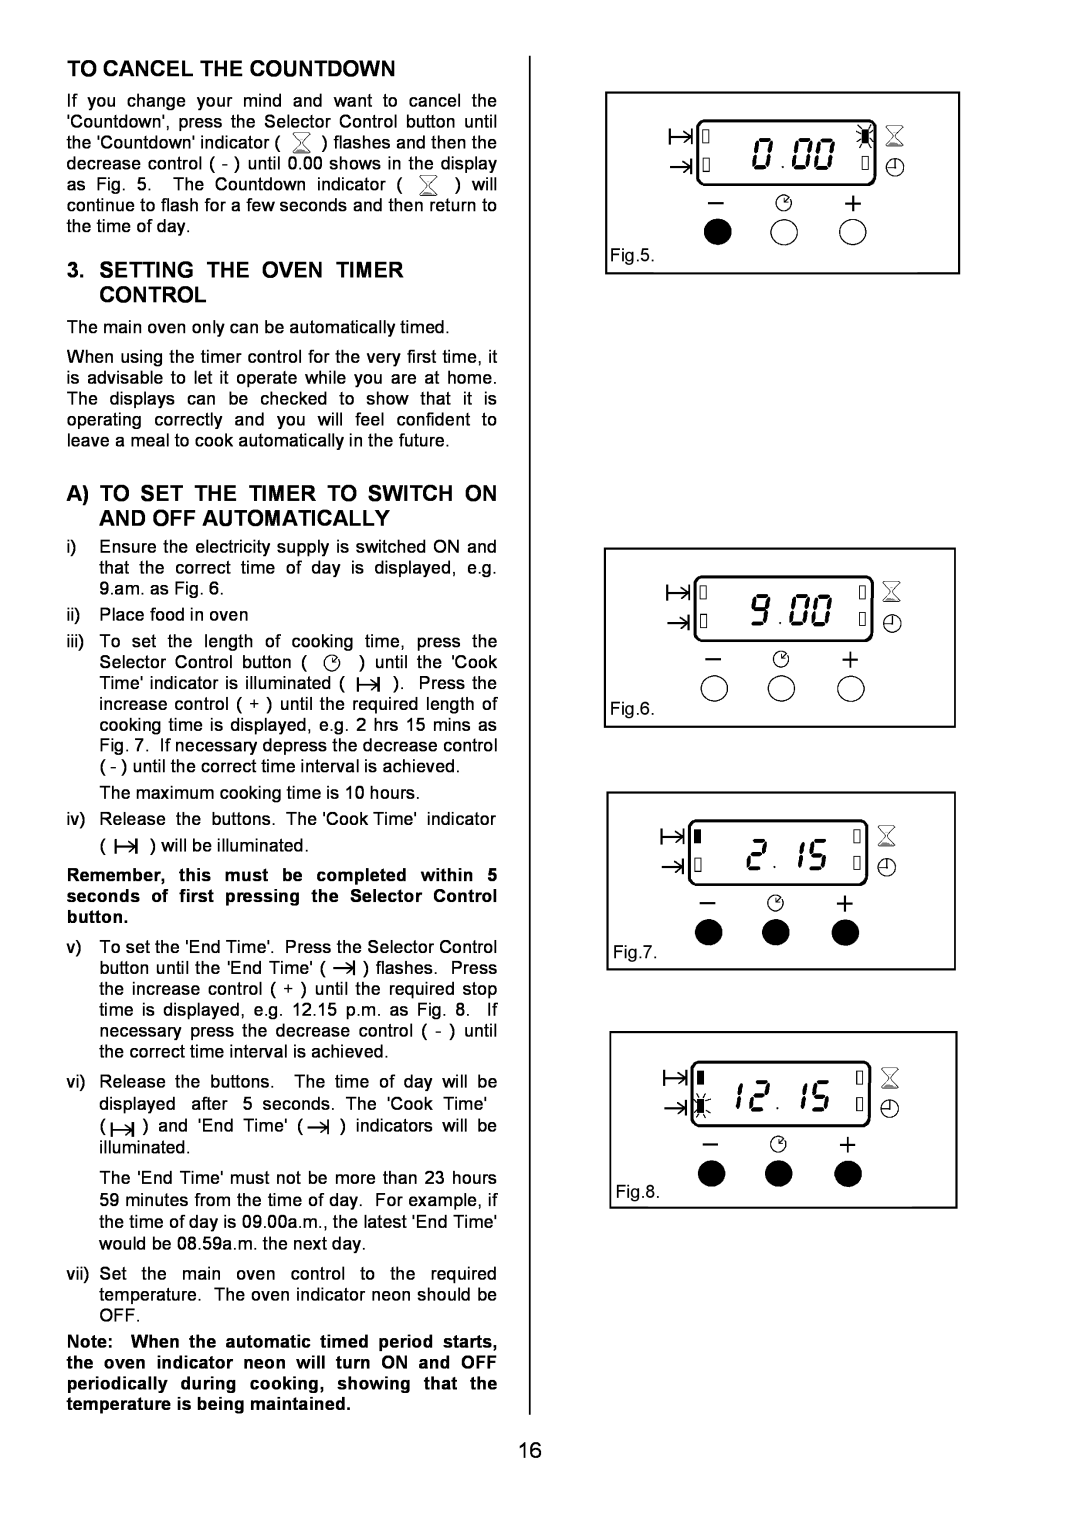 Zanussi ZDQ 695 manual To Cancel The Countdown, Setting The Oven Timer Control 